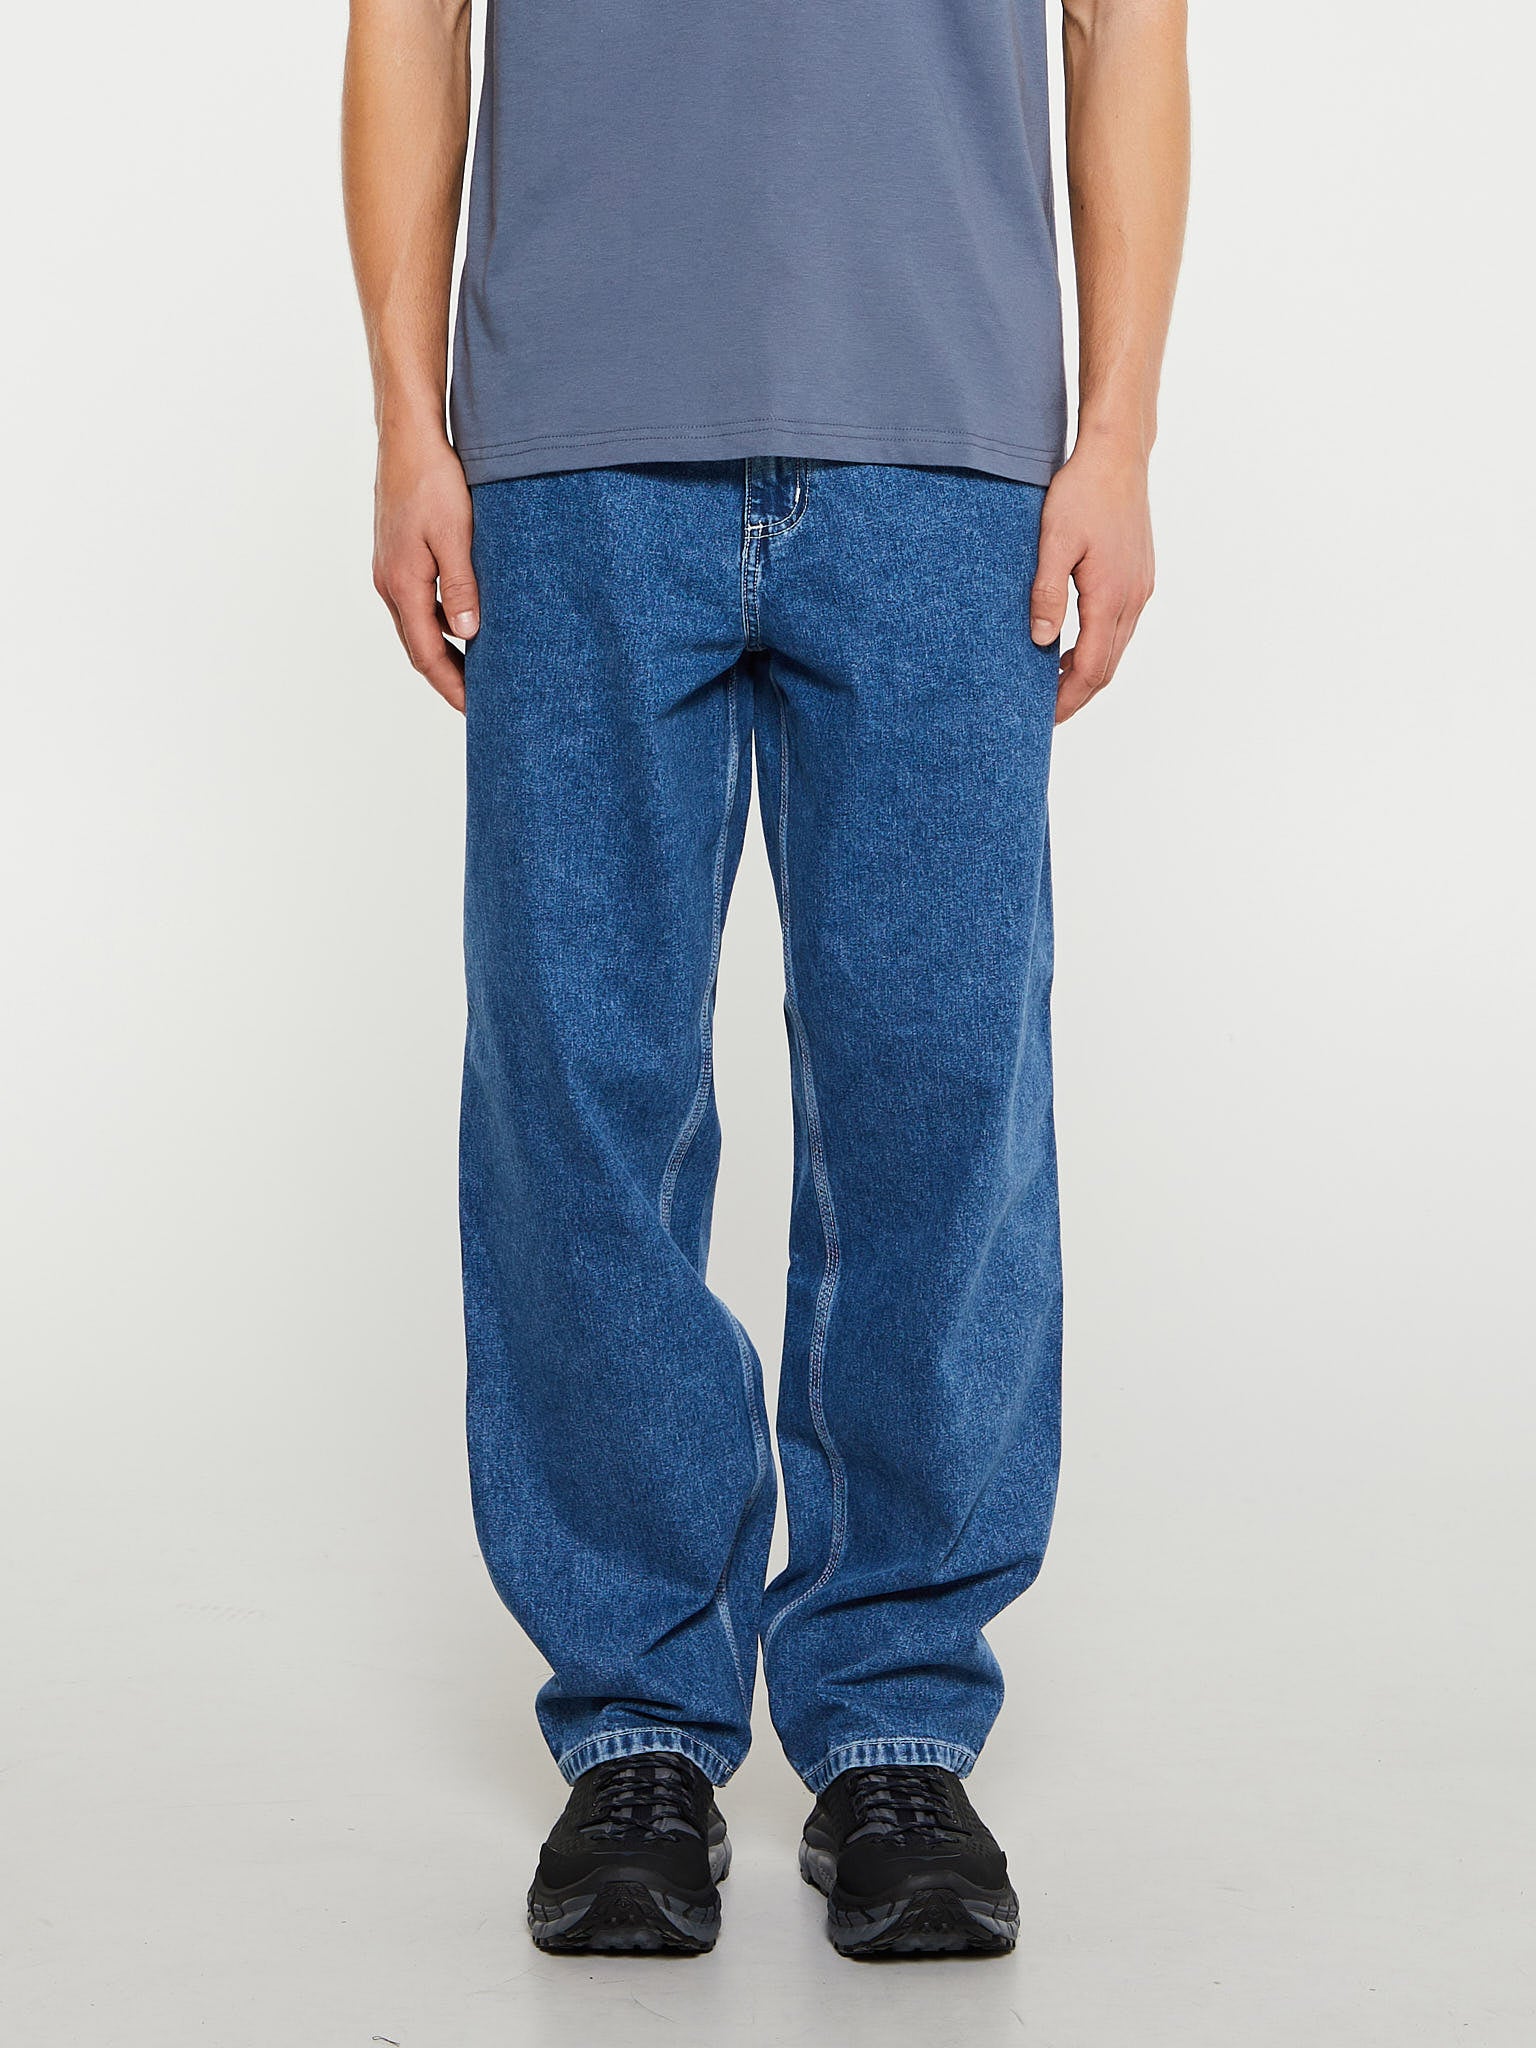 Carhartt - Simple Pants in Blue Stone Washed